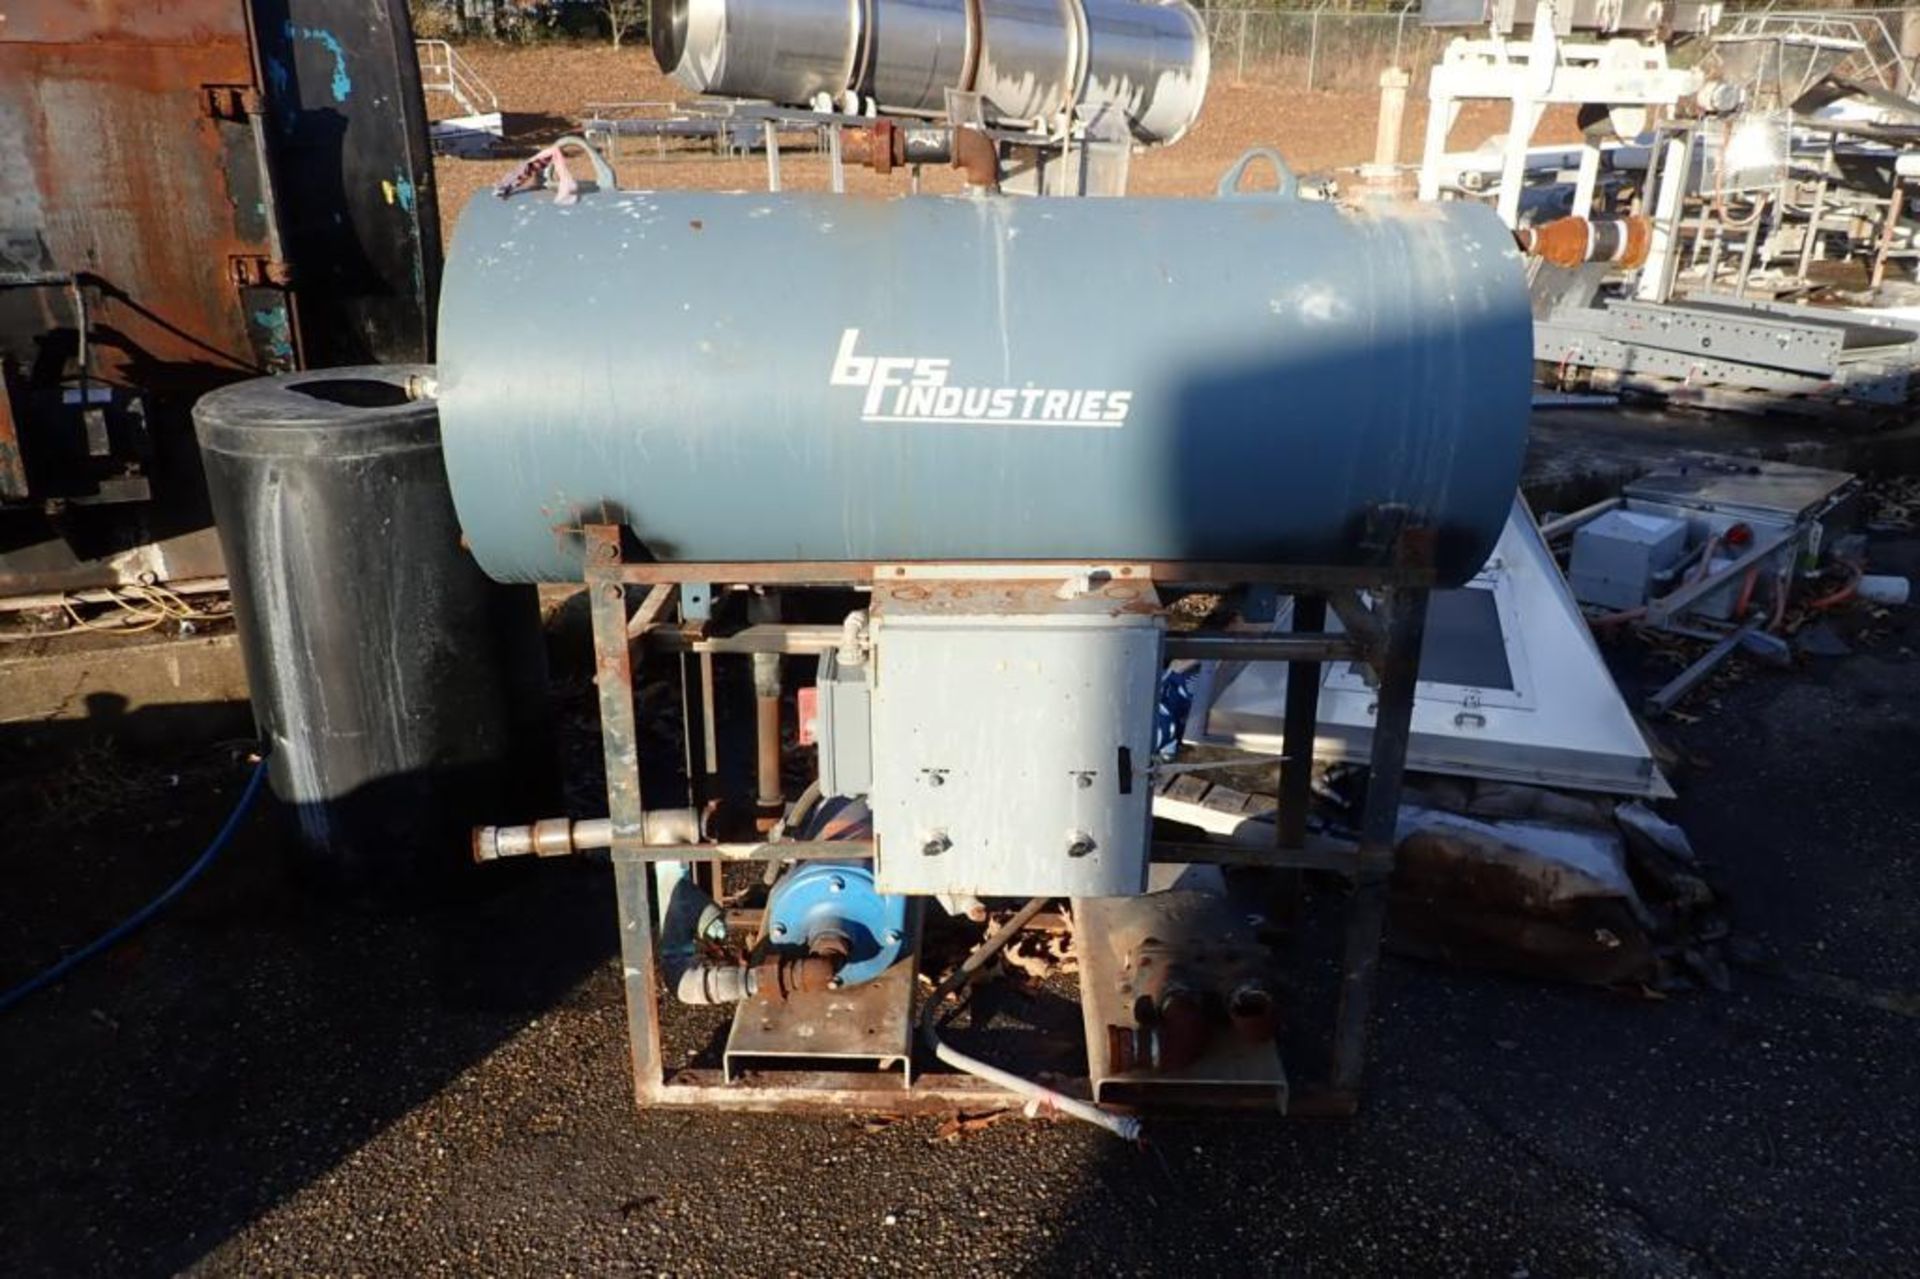 1986 Cleaver Brooks packed boiler, SN L-81680, with misc. components - ** Located in Dothan, Alabama - Image 7 of 11